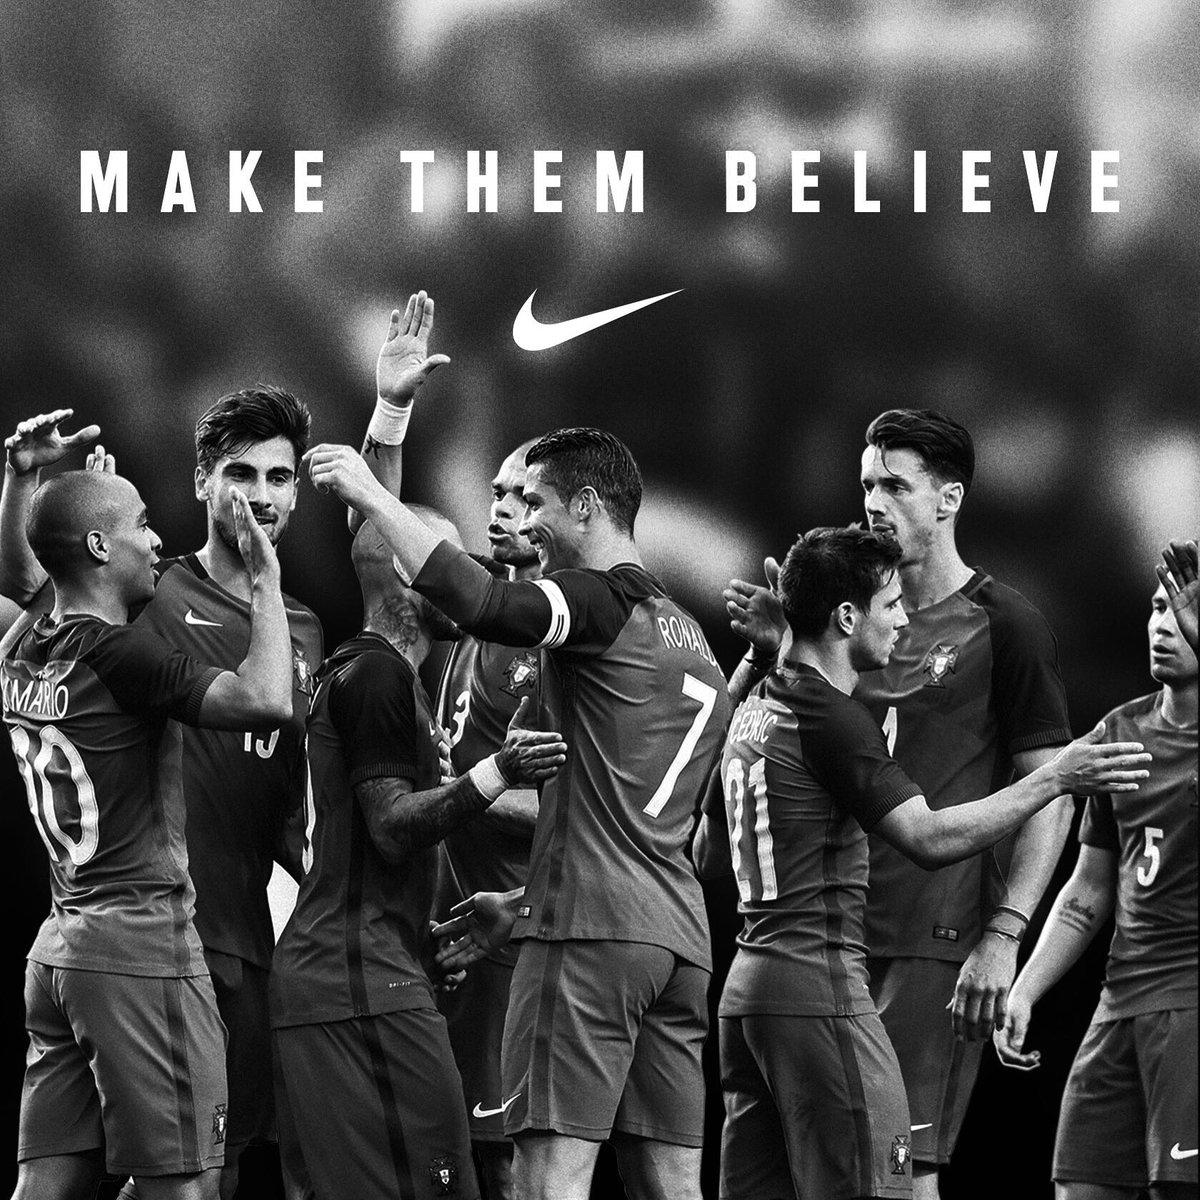 Proud of my team. Proud of my country. Make them believe. #JustDoIt